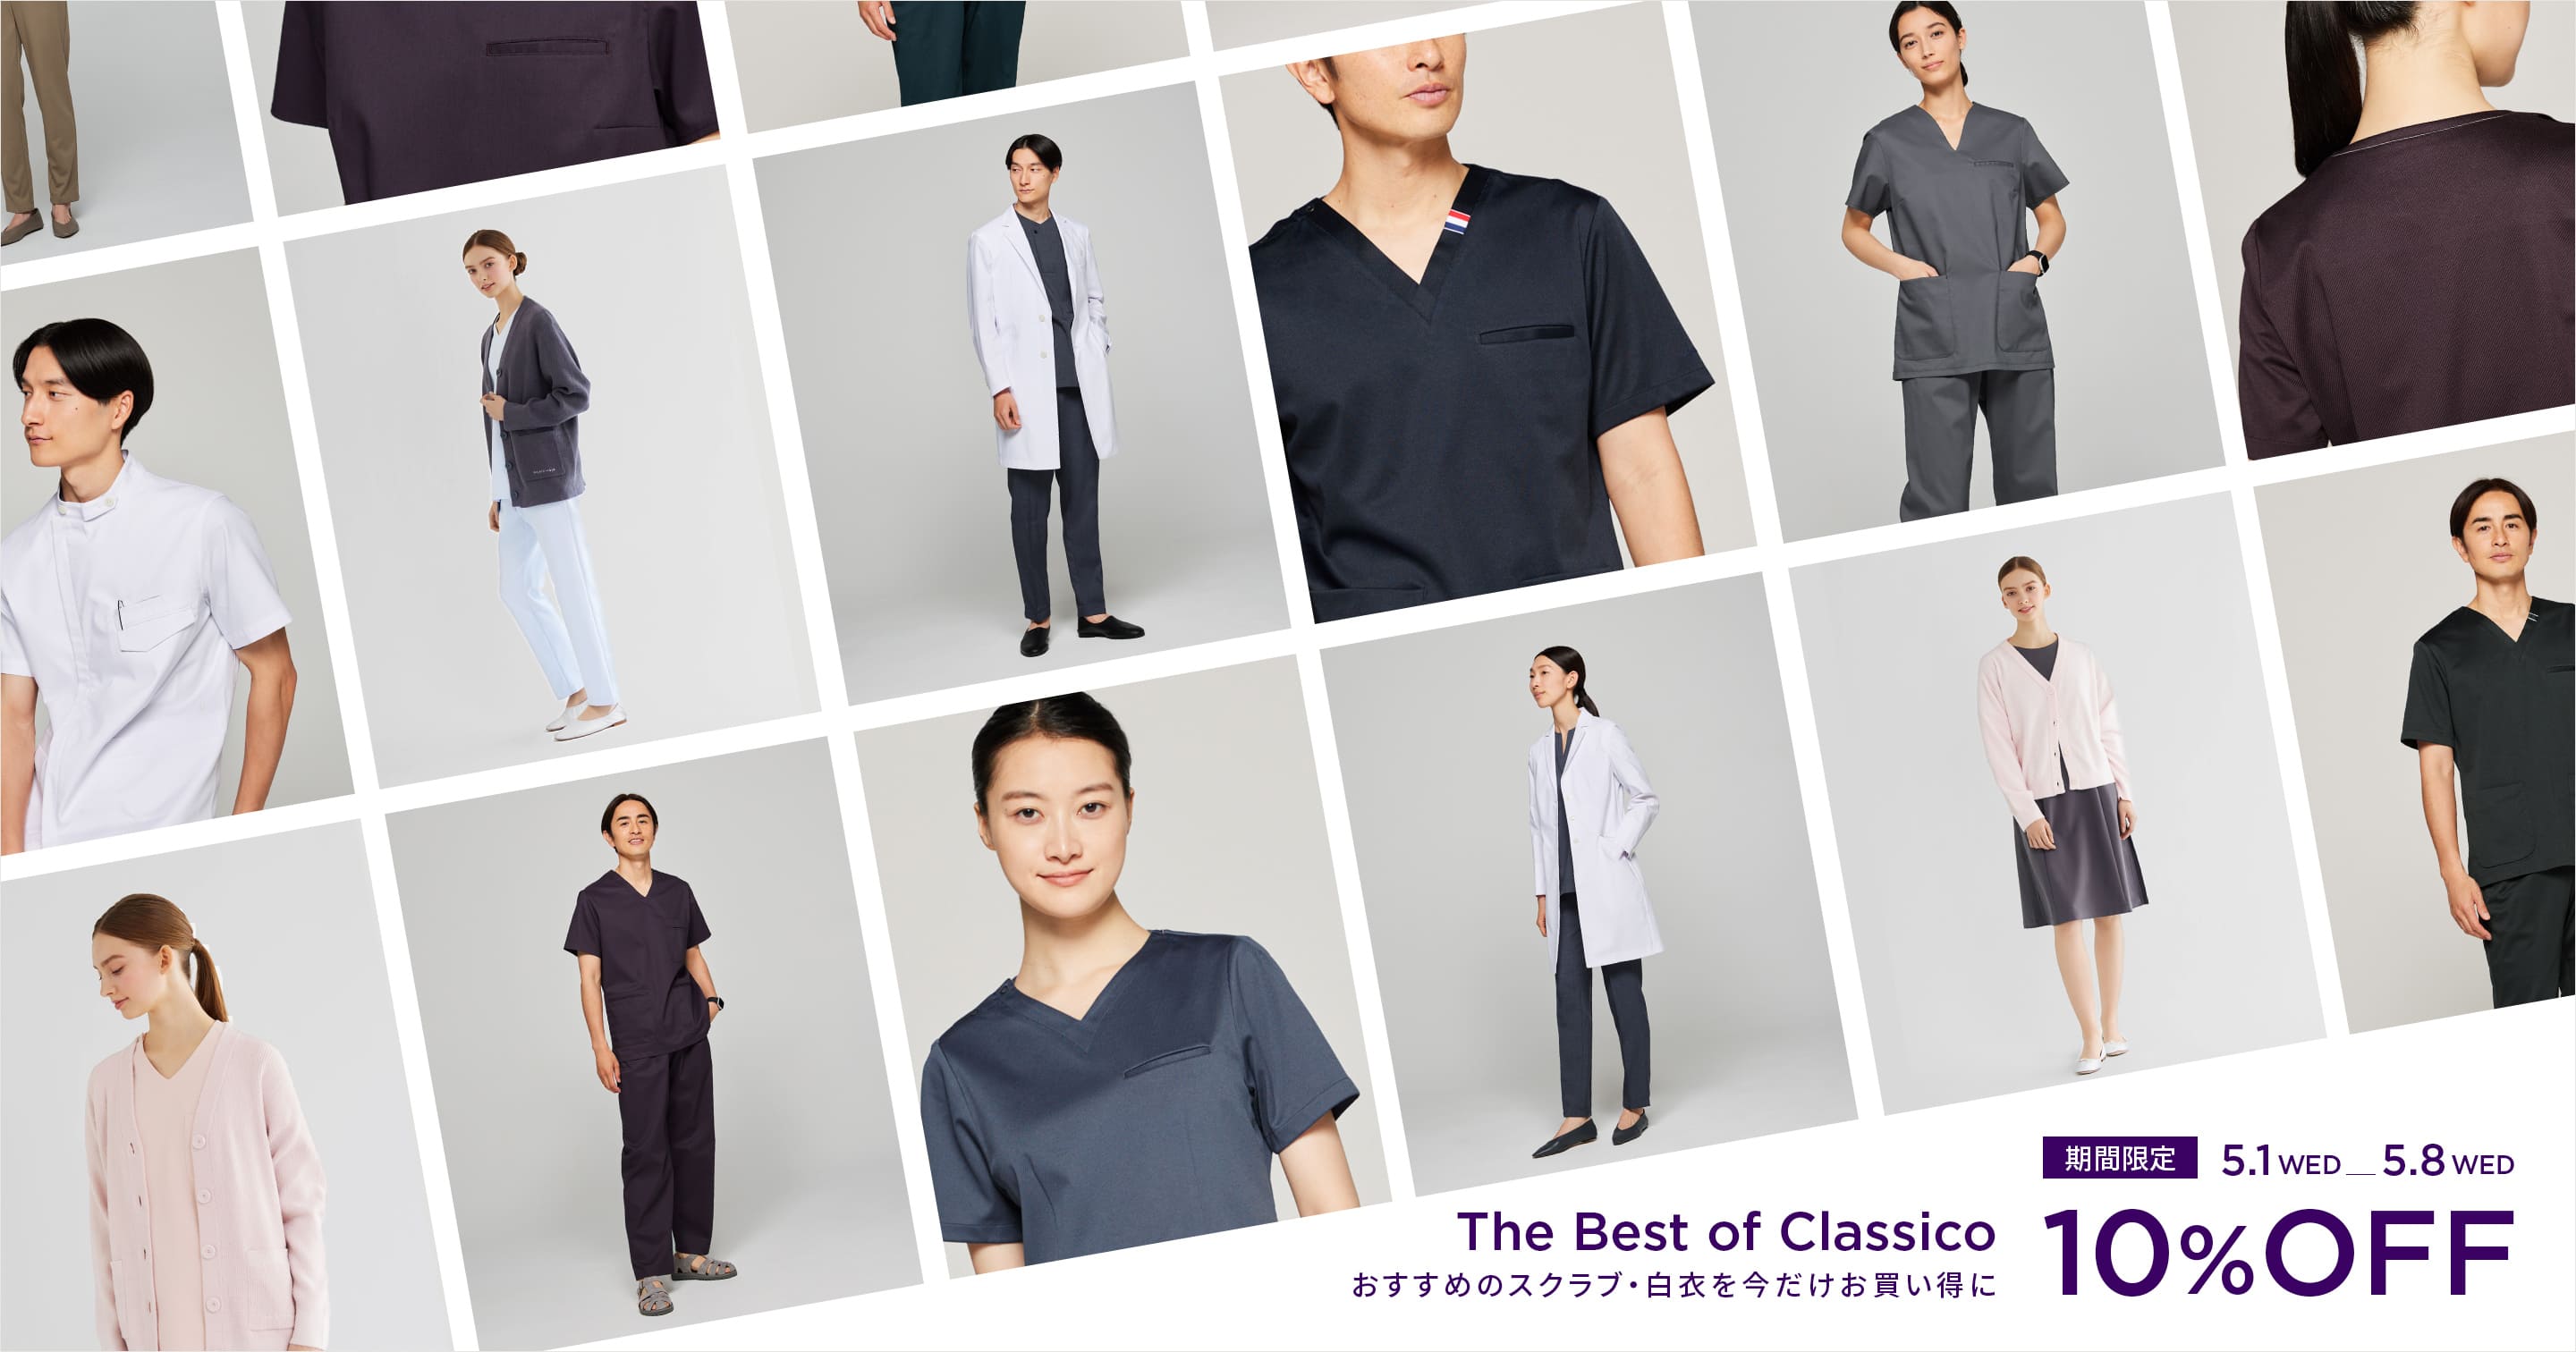 The Best of Classico 10%OFF